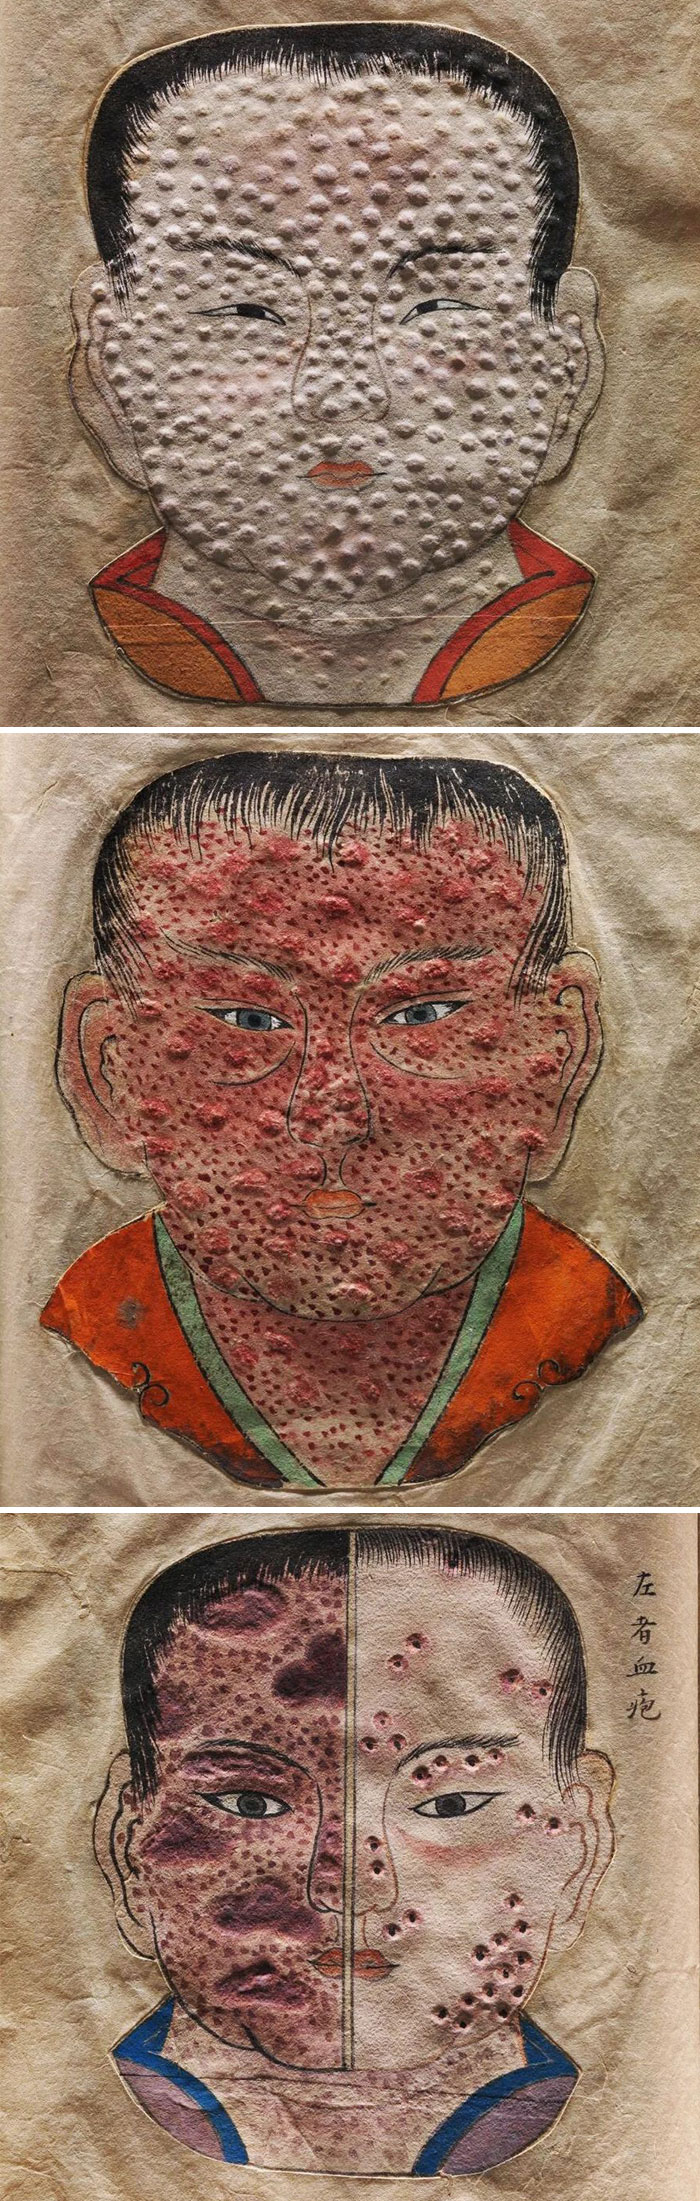 Amazing Illustrations From A C.1720 Japanese Medical Book On Smallpox, Which Cleverly Uses Paper Embossing To Show The Changing Texture Of Smallpox Lesions During Different Stages Of The Disease